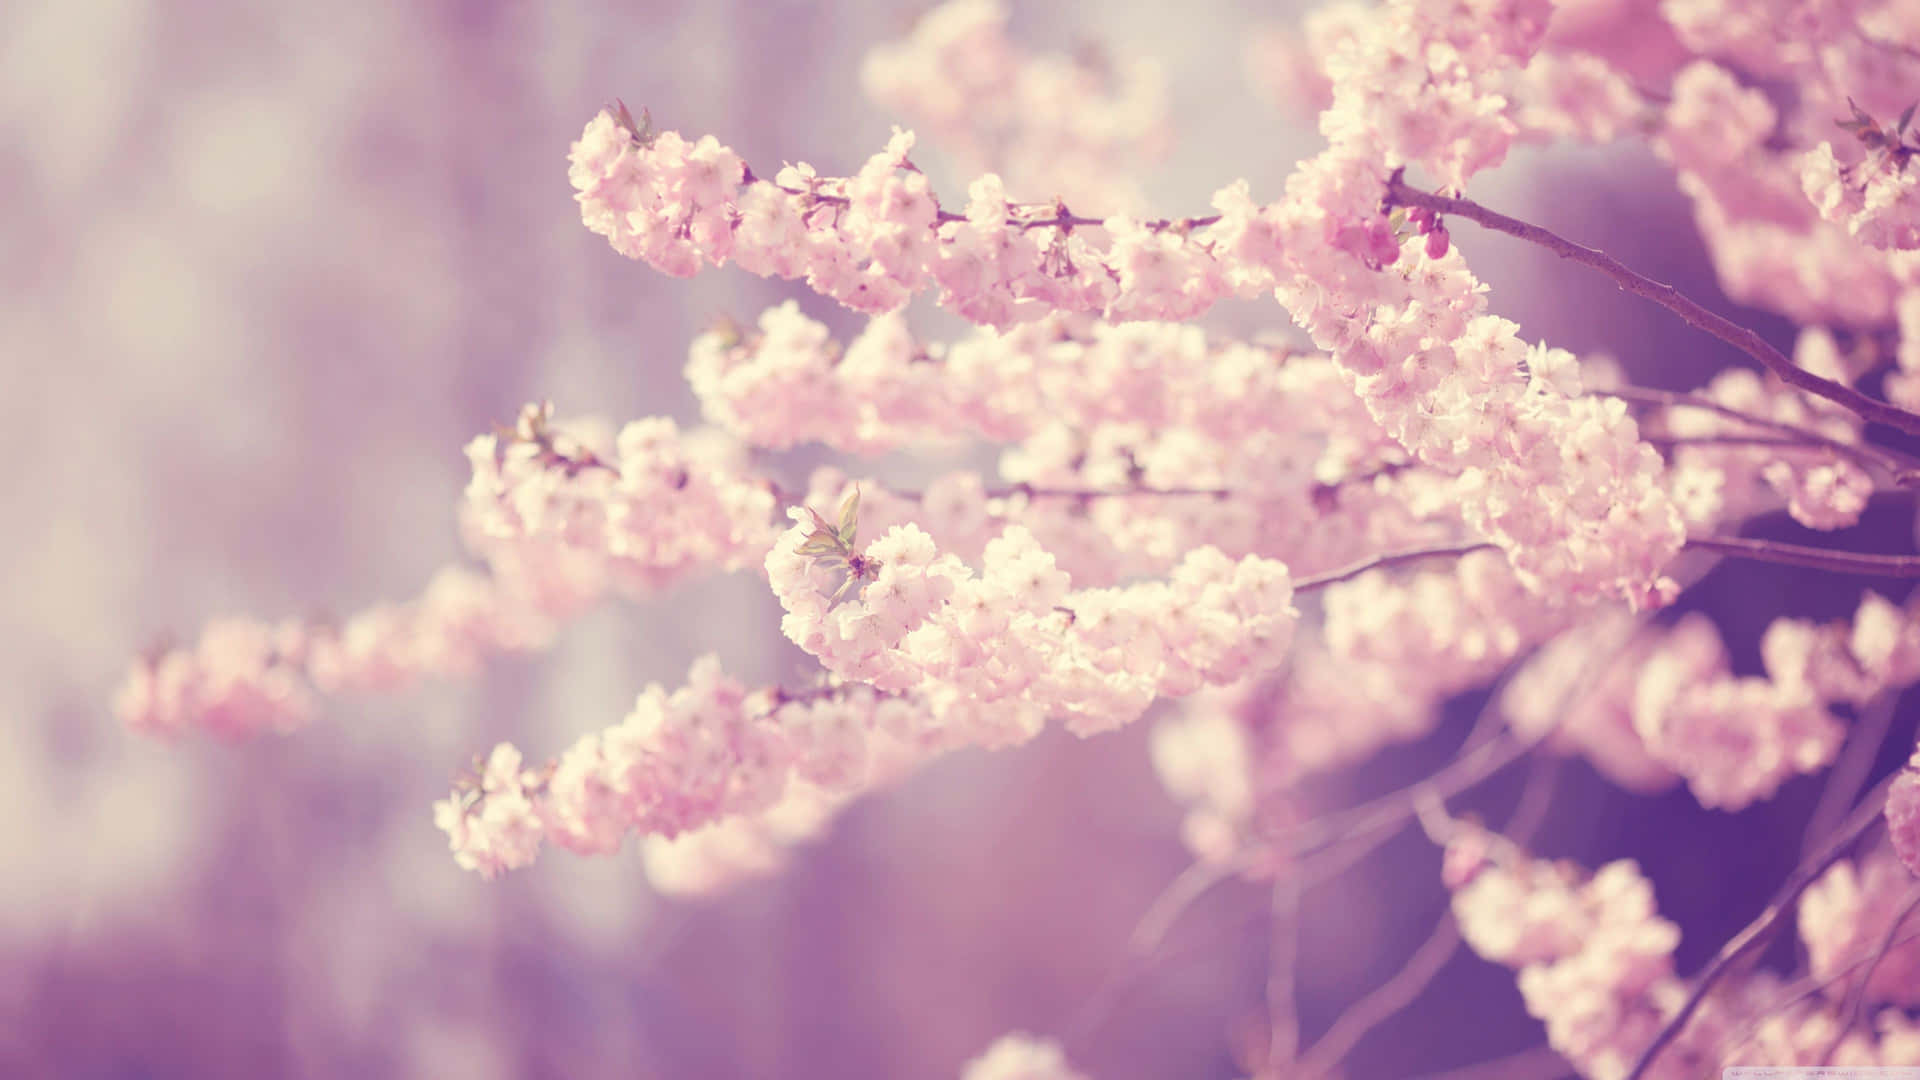 Soft pink cherry blossom blooms among a vibrant spring landscape. Wallpaper